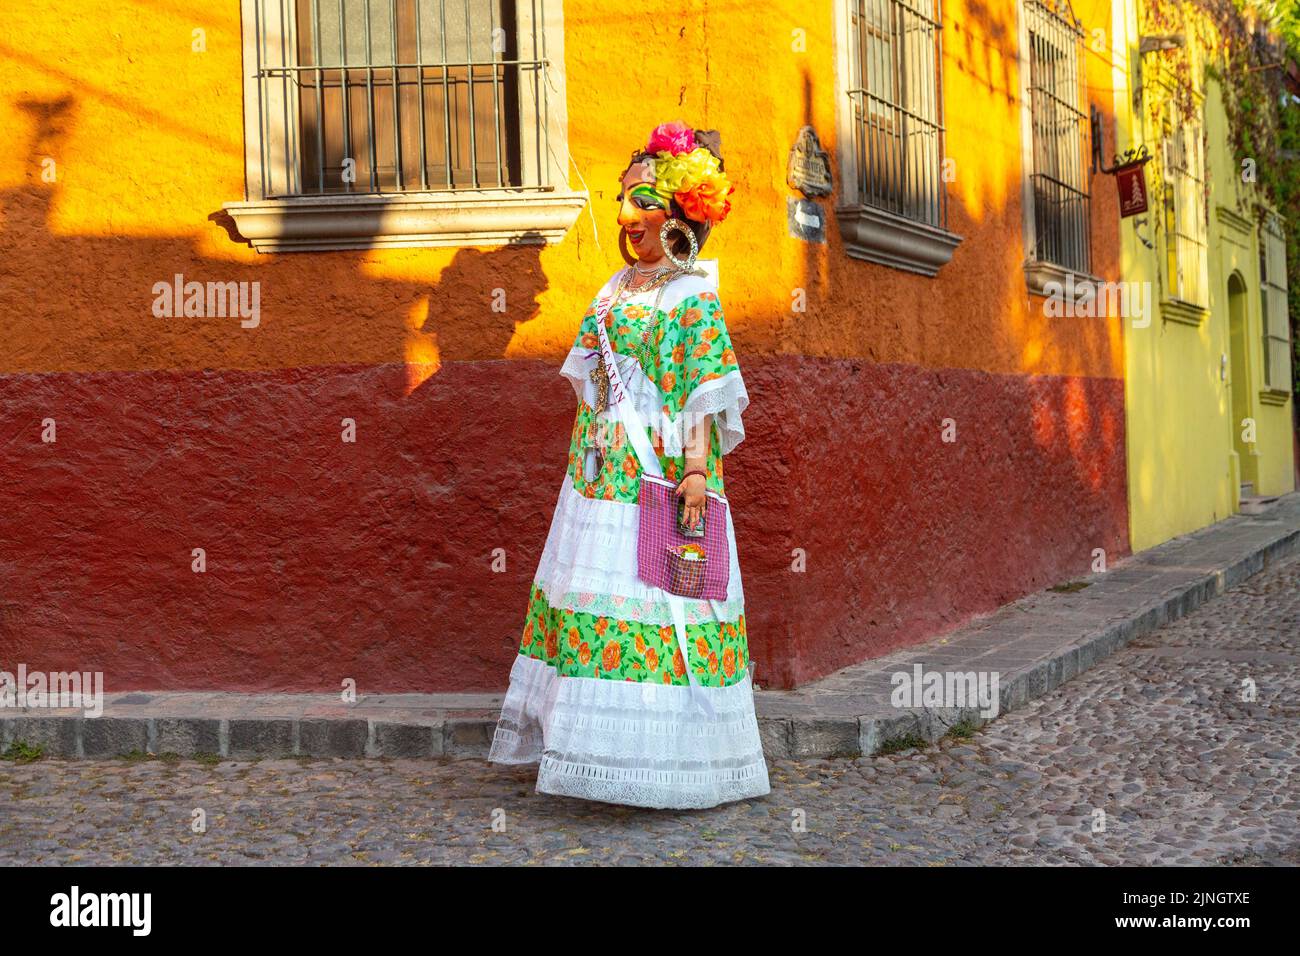 A mojiganga, or giant puppet made from papier mâché walks through the historic city center of San Miguel de Allende, Mexico. Stock Photo